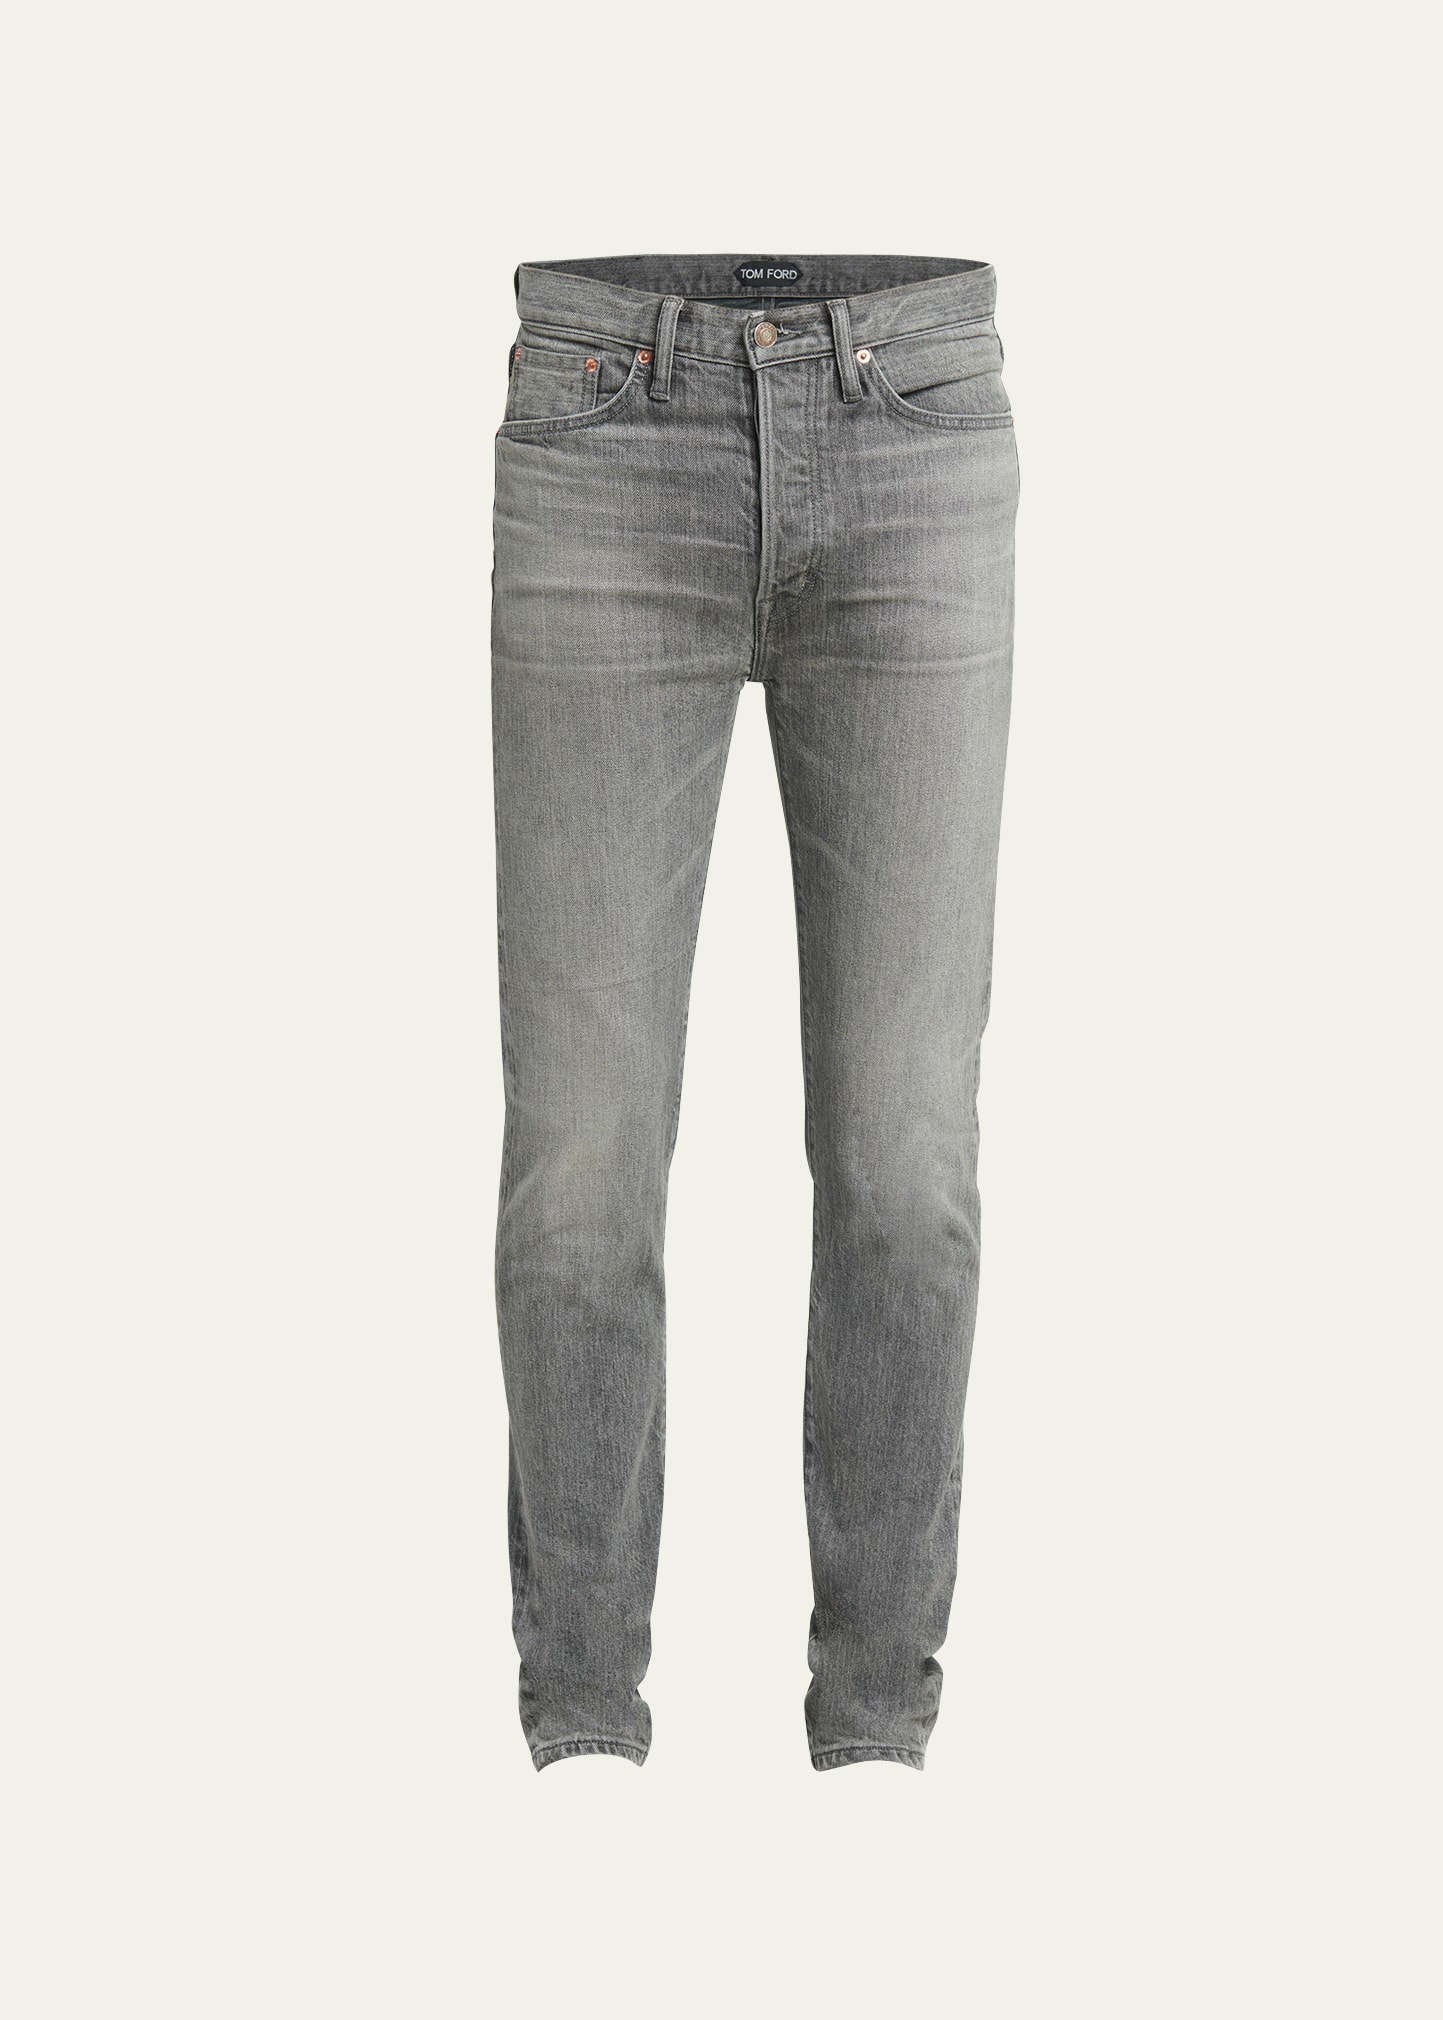 Tom Ford Men's Standard-fit Stretch Jeans In Pale Grey